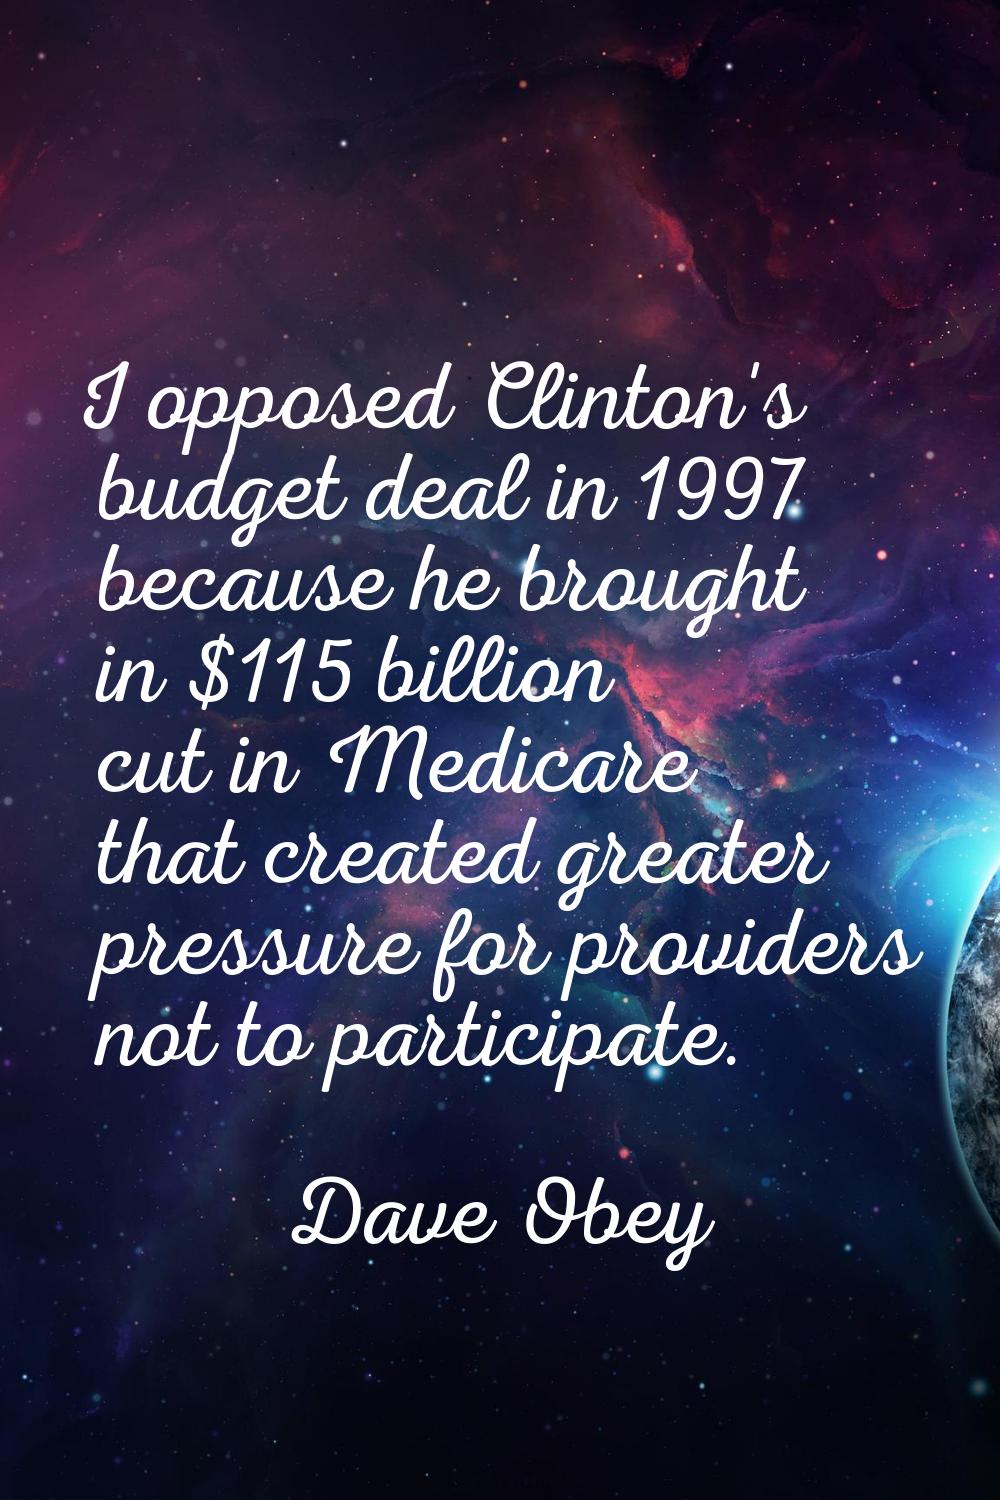 I opposed Clinton's budget deal in 1997 because he brought in $115 billion cut in Medicare that cre